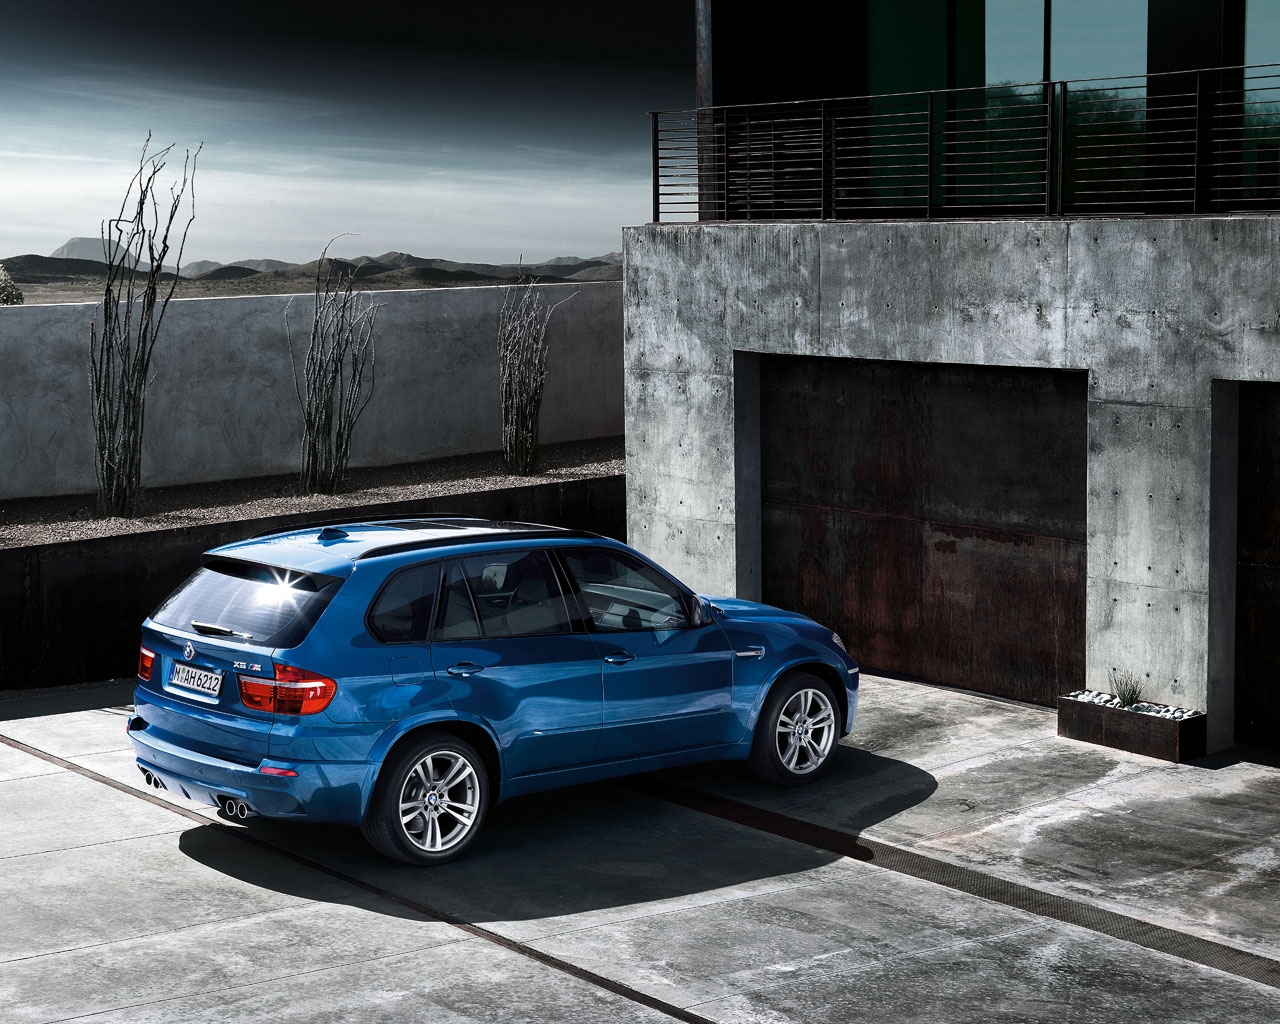 BMW X5 M Wallpaper Gallery |Clickandseeworld is all about Funny ...